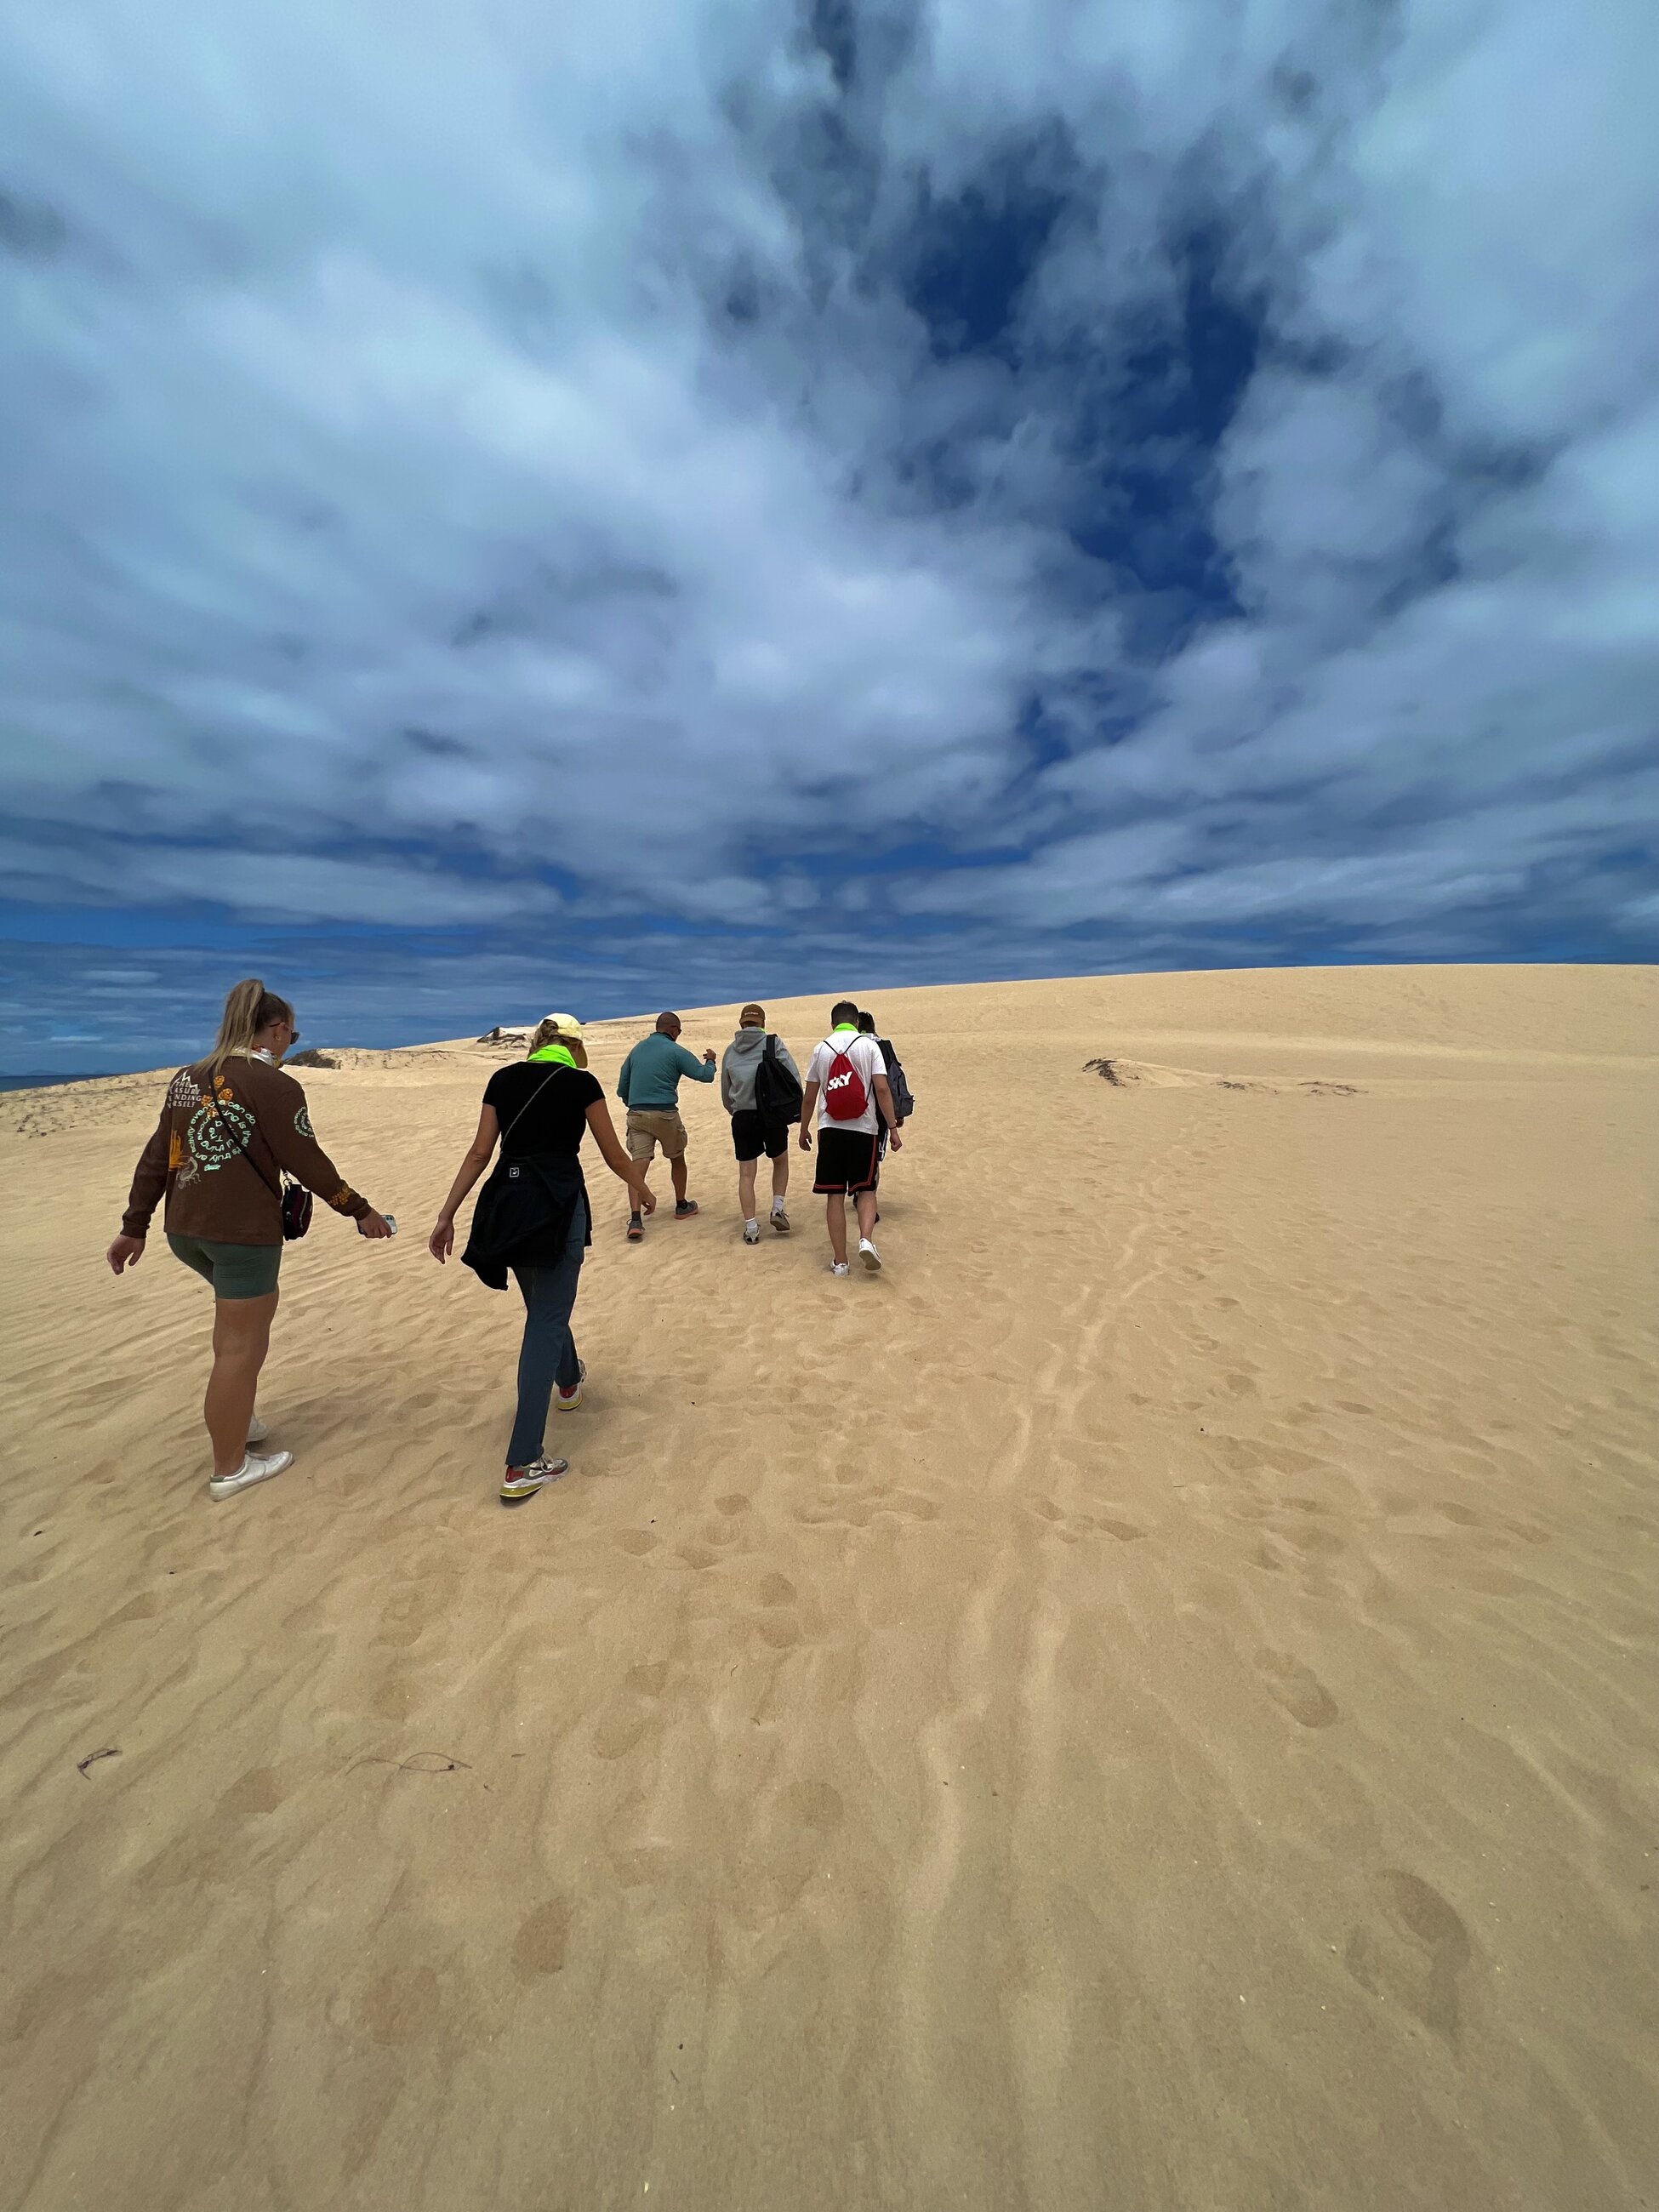 Scaling the dunes in Corralejo National Park